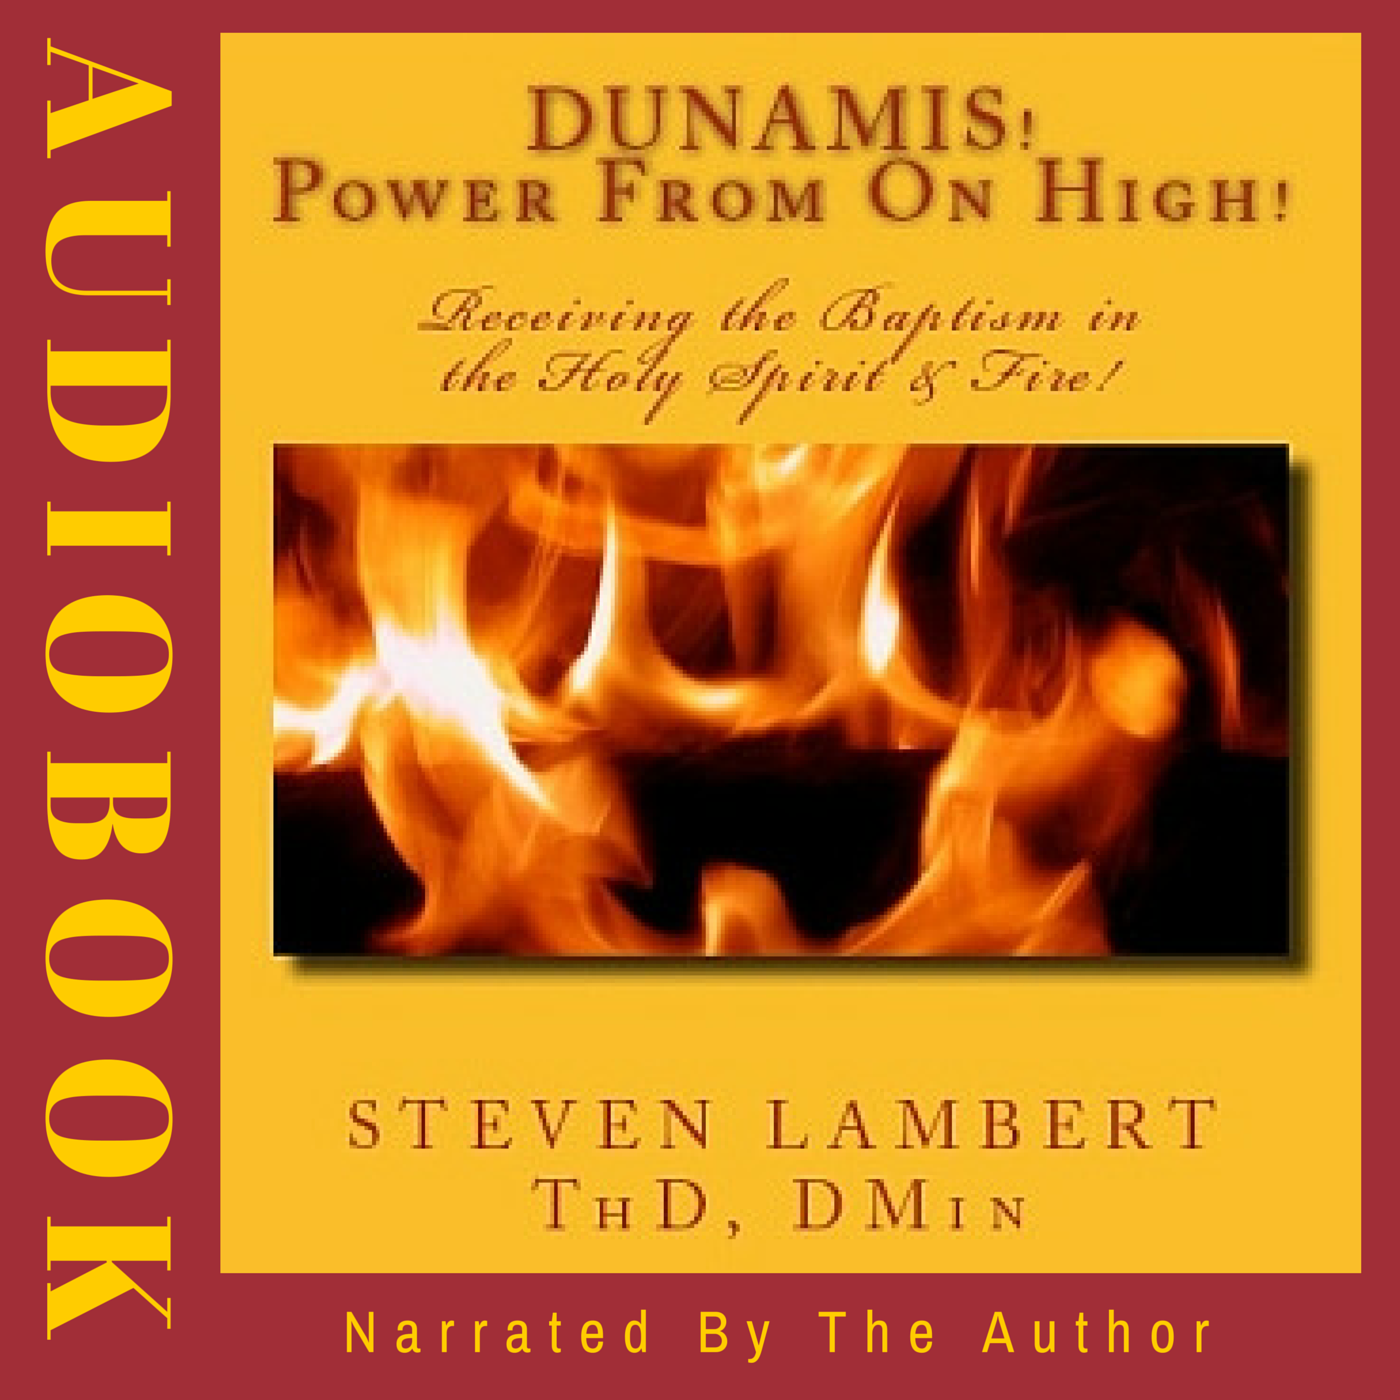 DUNAMIS! Power from on High! Audiobook